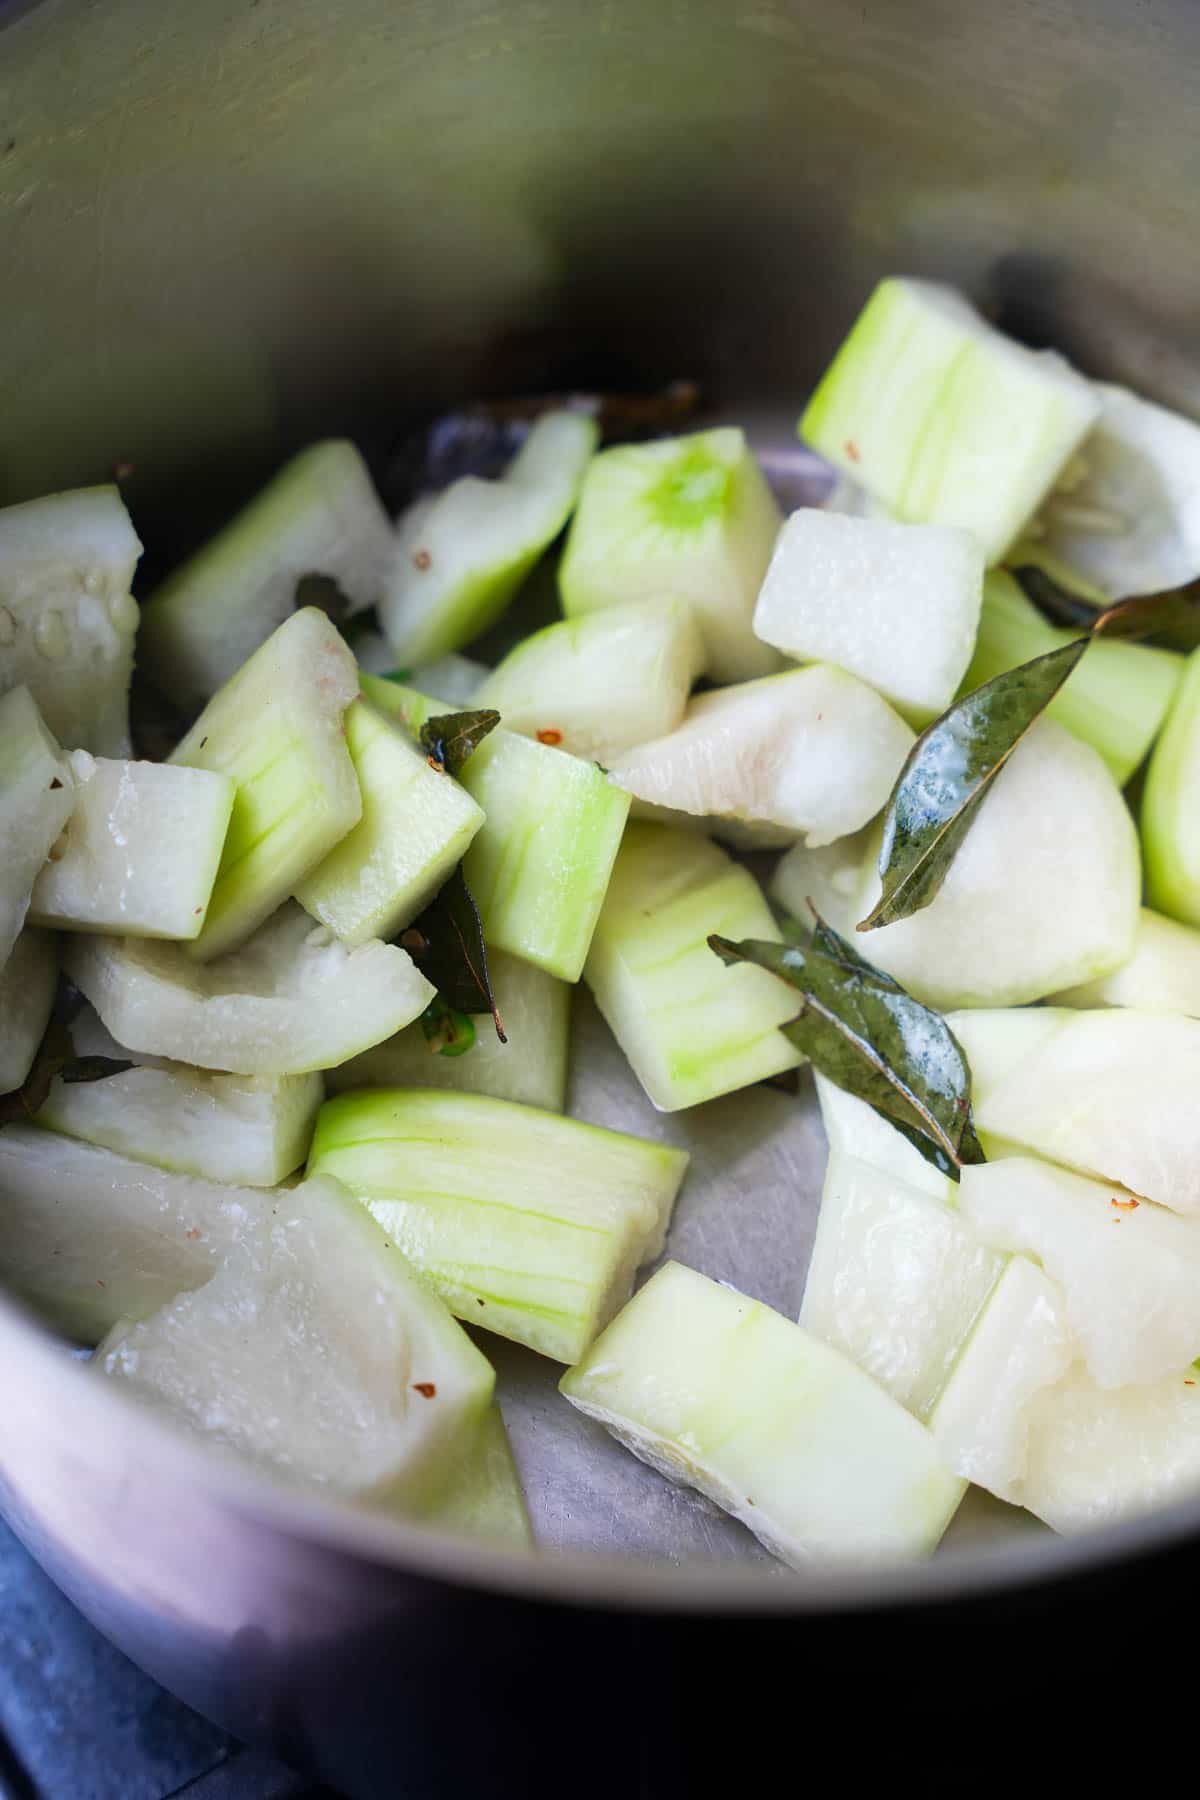 Peeled gourd is sautéed with chilies and curry leaves in a stainless steel pot.